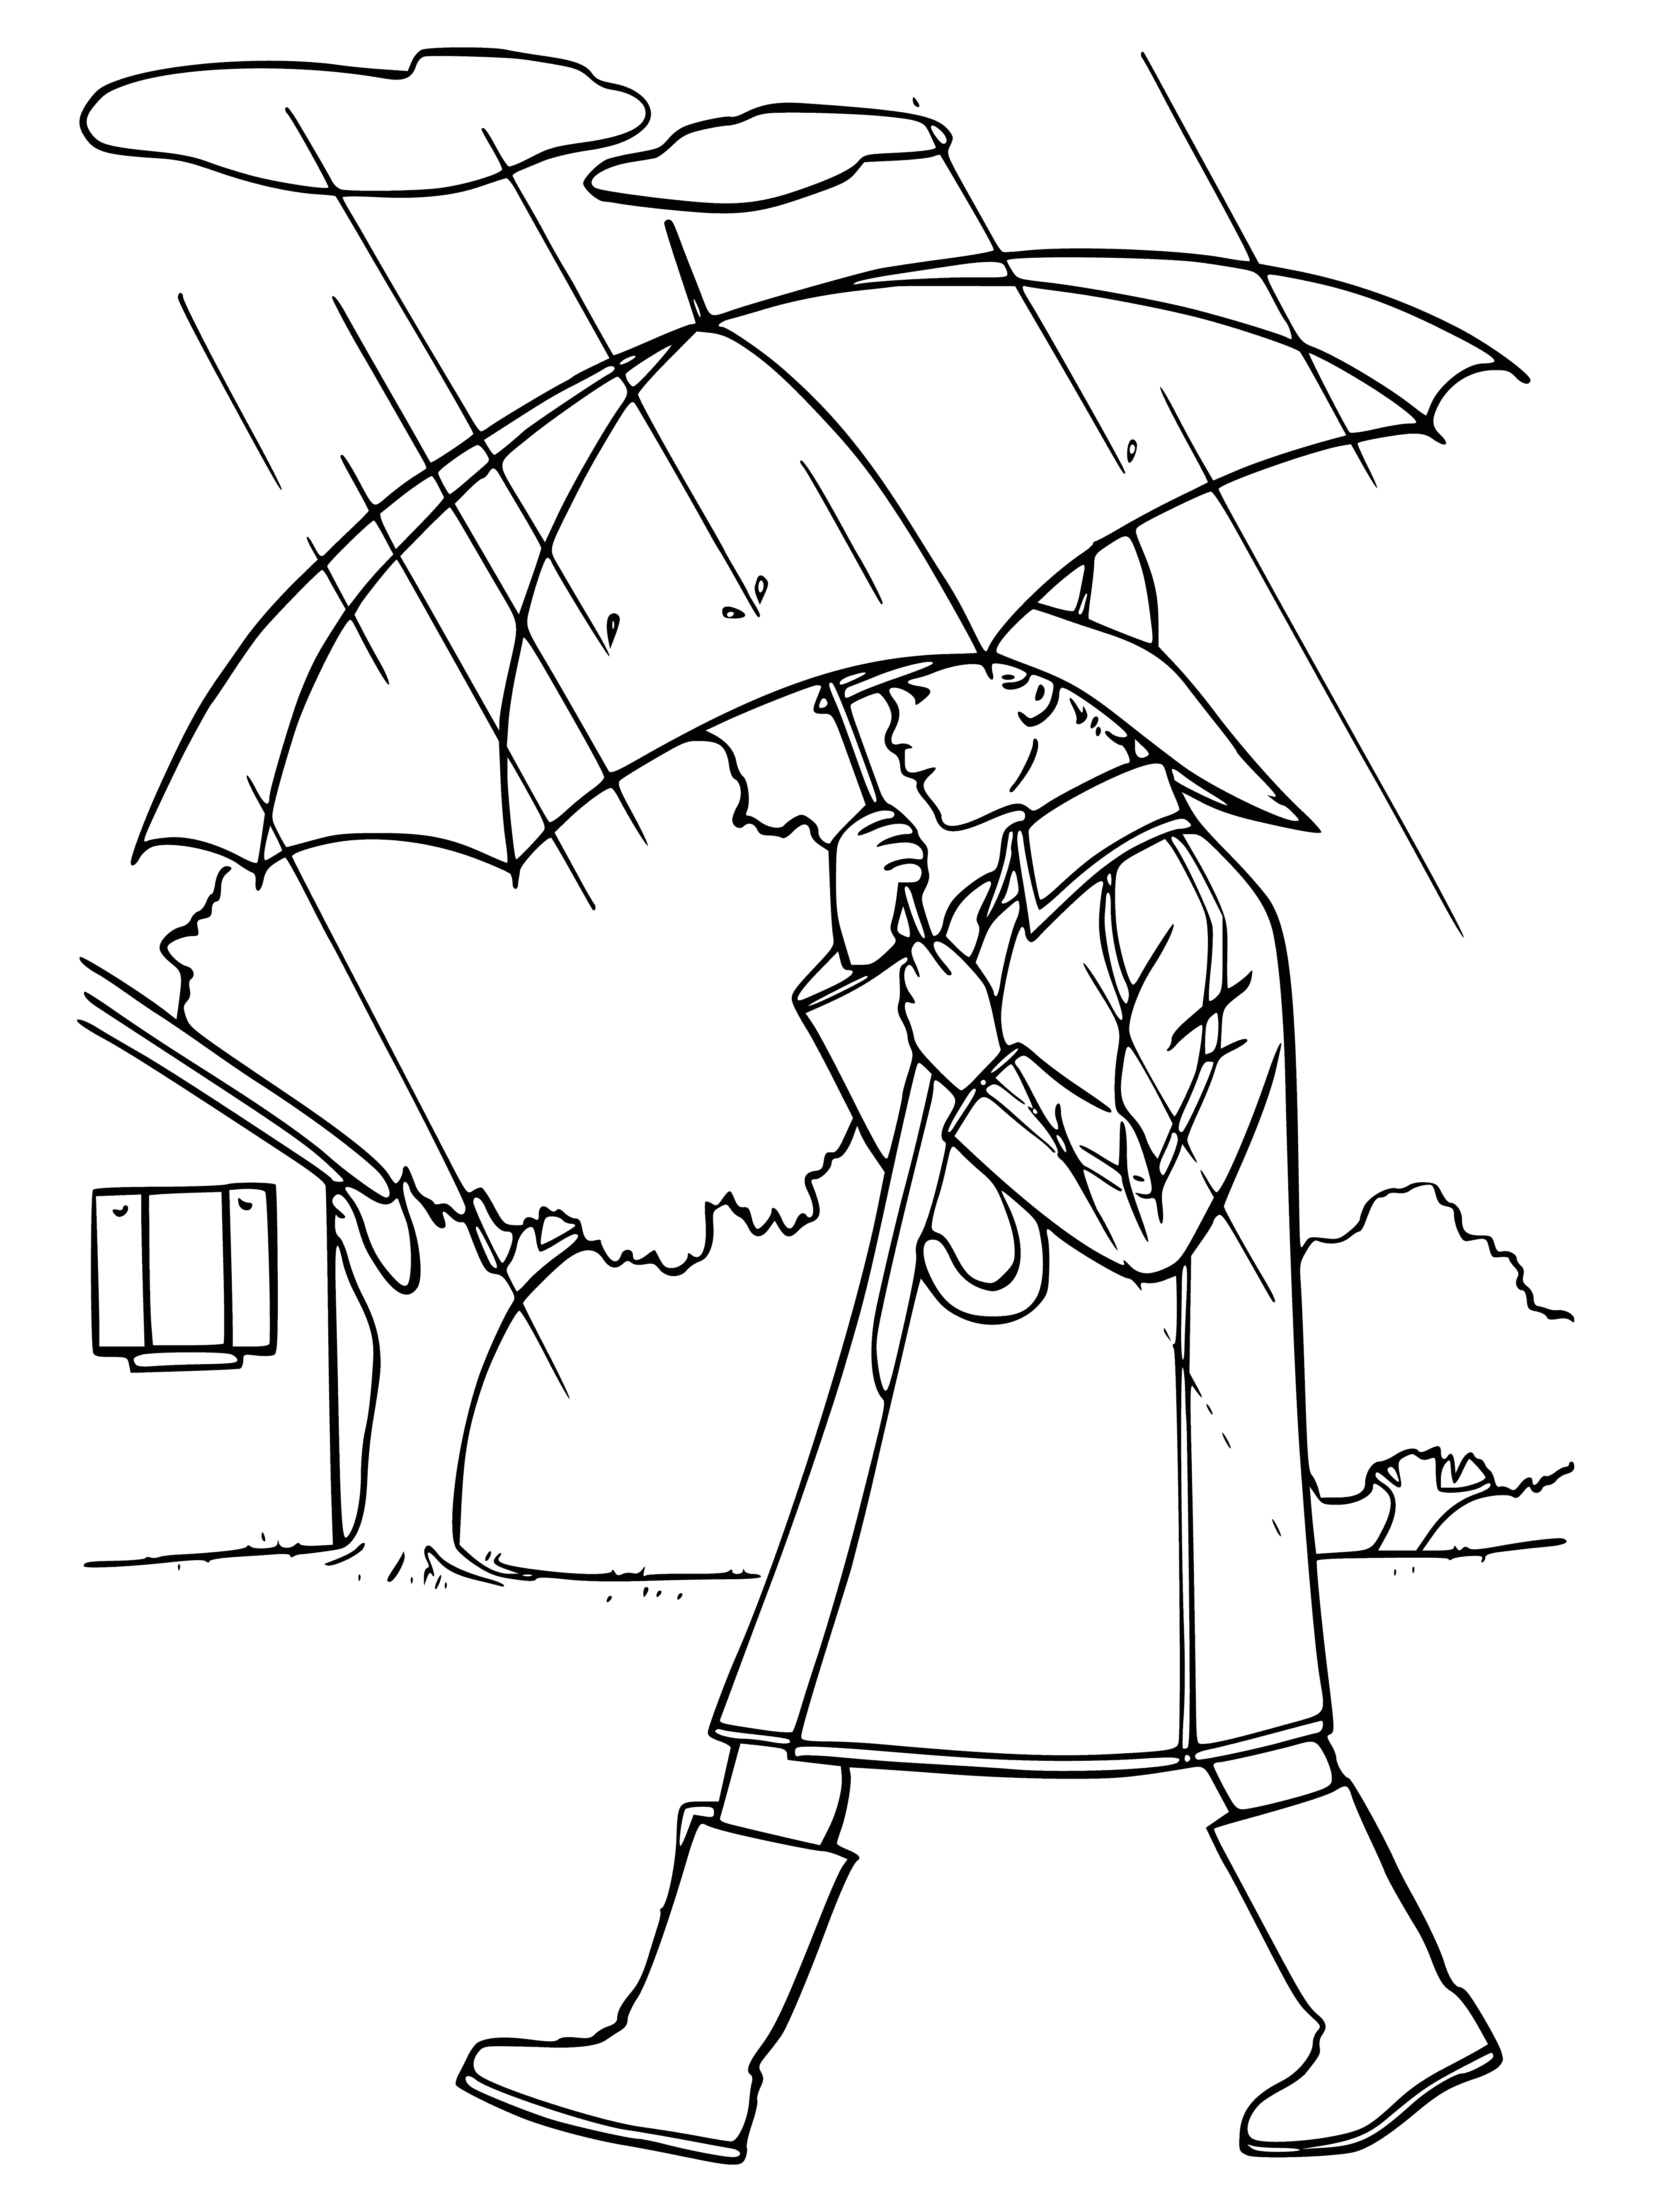 coloring page: Boy in coloring page walks in rain wearing blue coat, red umbrella & black backpack.